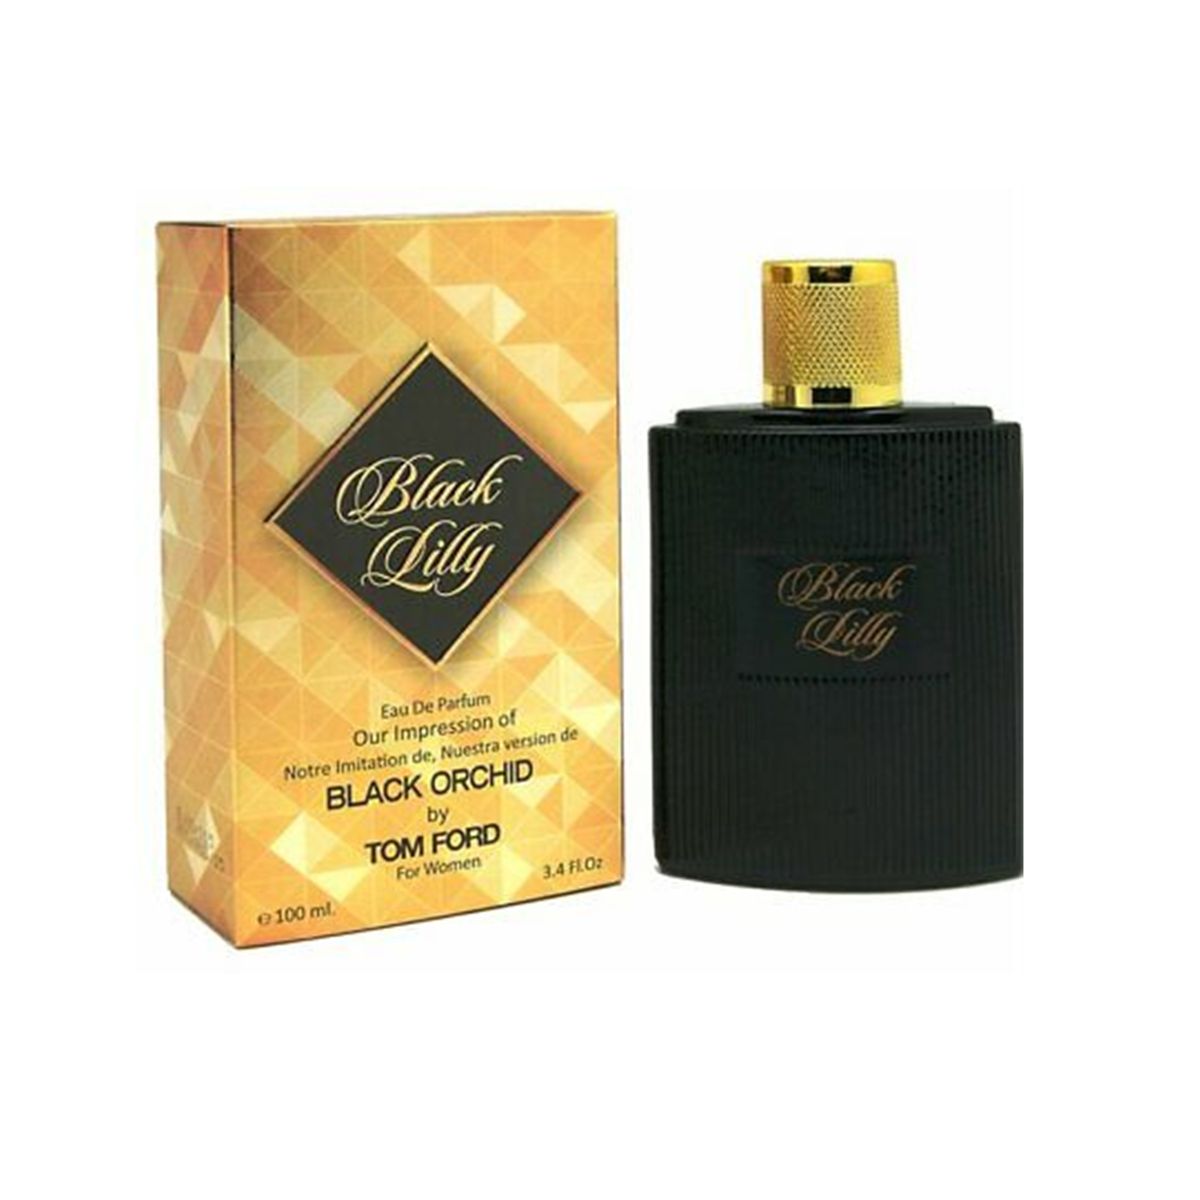 Black Lilly - Black Orchid by Tom Ford, For Women, Alternative, Impression,  Version, Type - CheapoGood